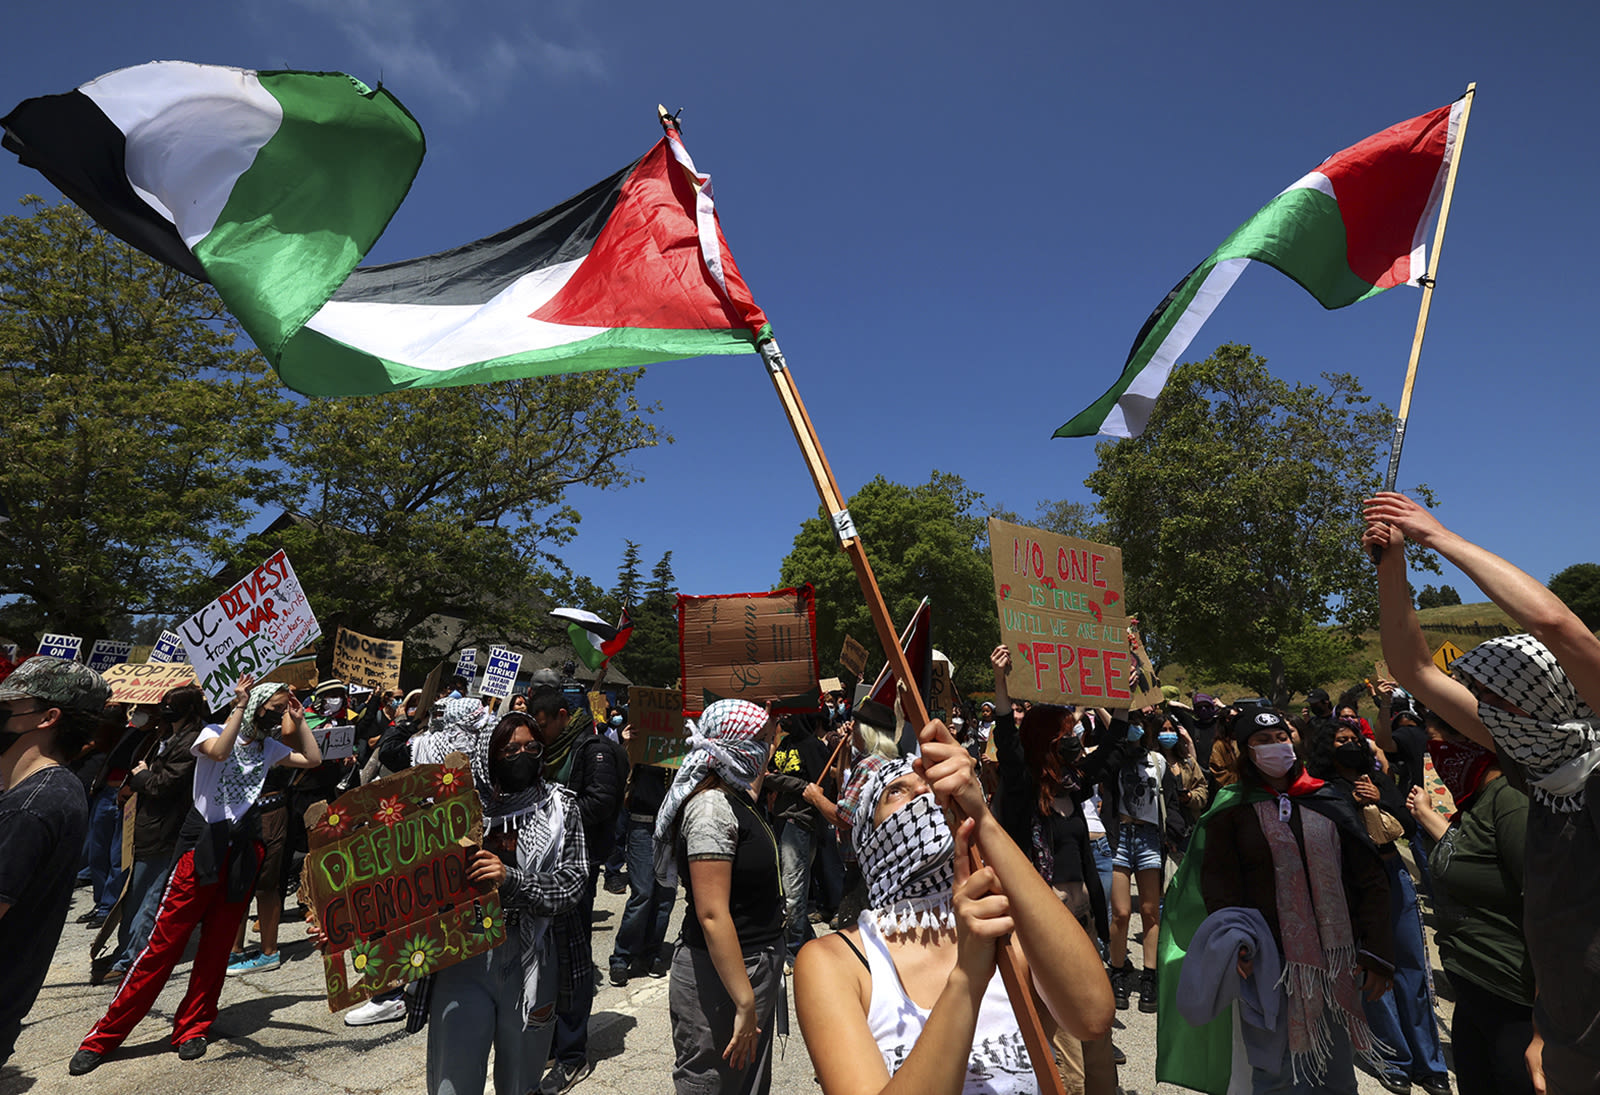 University of California academic workers strike to stand up for pro-Palestinian protesters